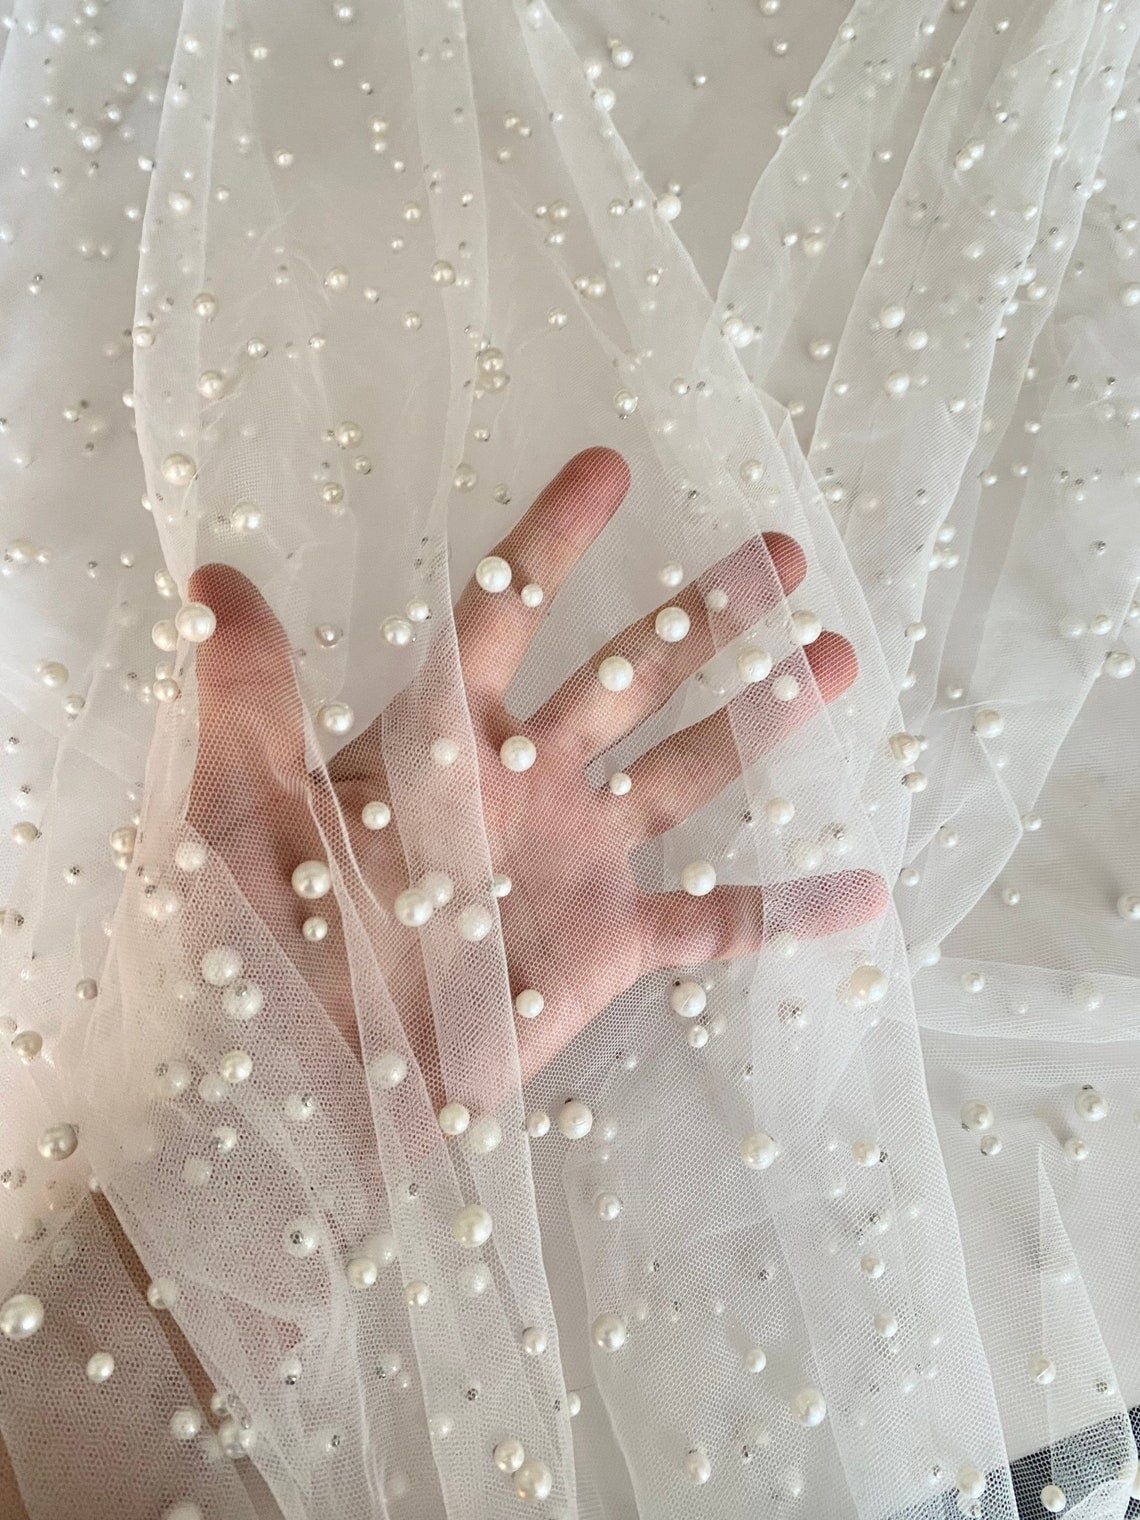 off white Pearl Tulle, white pearl Tulle, bright white pearl tulle, milky white Pearl Tulle, shinny Pearl Tulle, Pearl Tulle for woman, Pearl Tulle for bride, Pearl Tulle on discount, Pearl Tulle on sale, premium Pearl Tulle, buy Pearl Tulle online